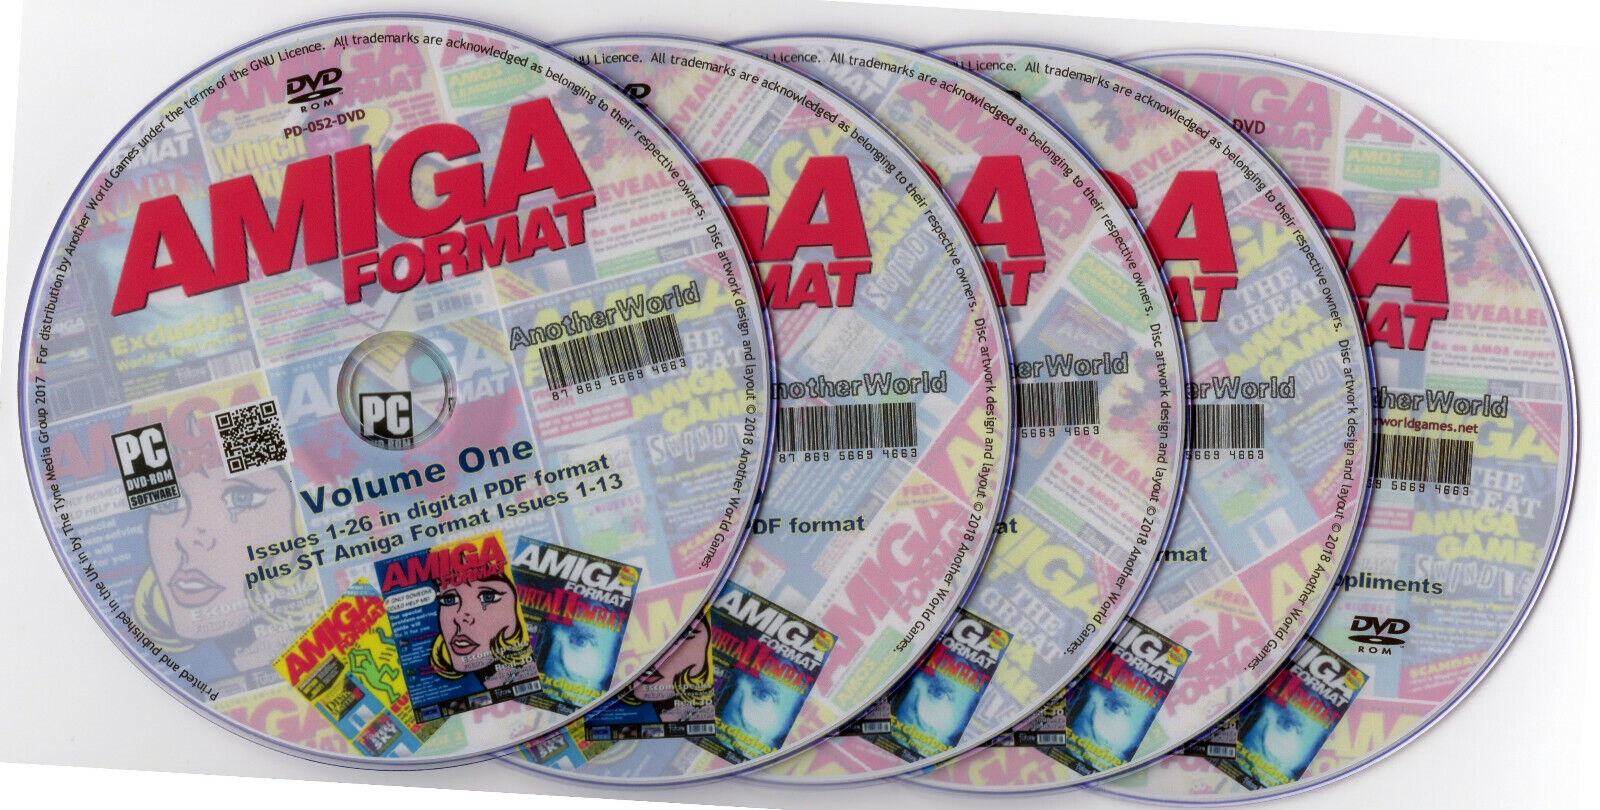 AMIGA FORMAT MAGAZINE Full Collection on Disk+Specials+ST Bonus (A500/CD32 Games